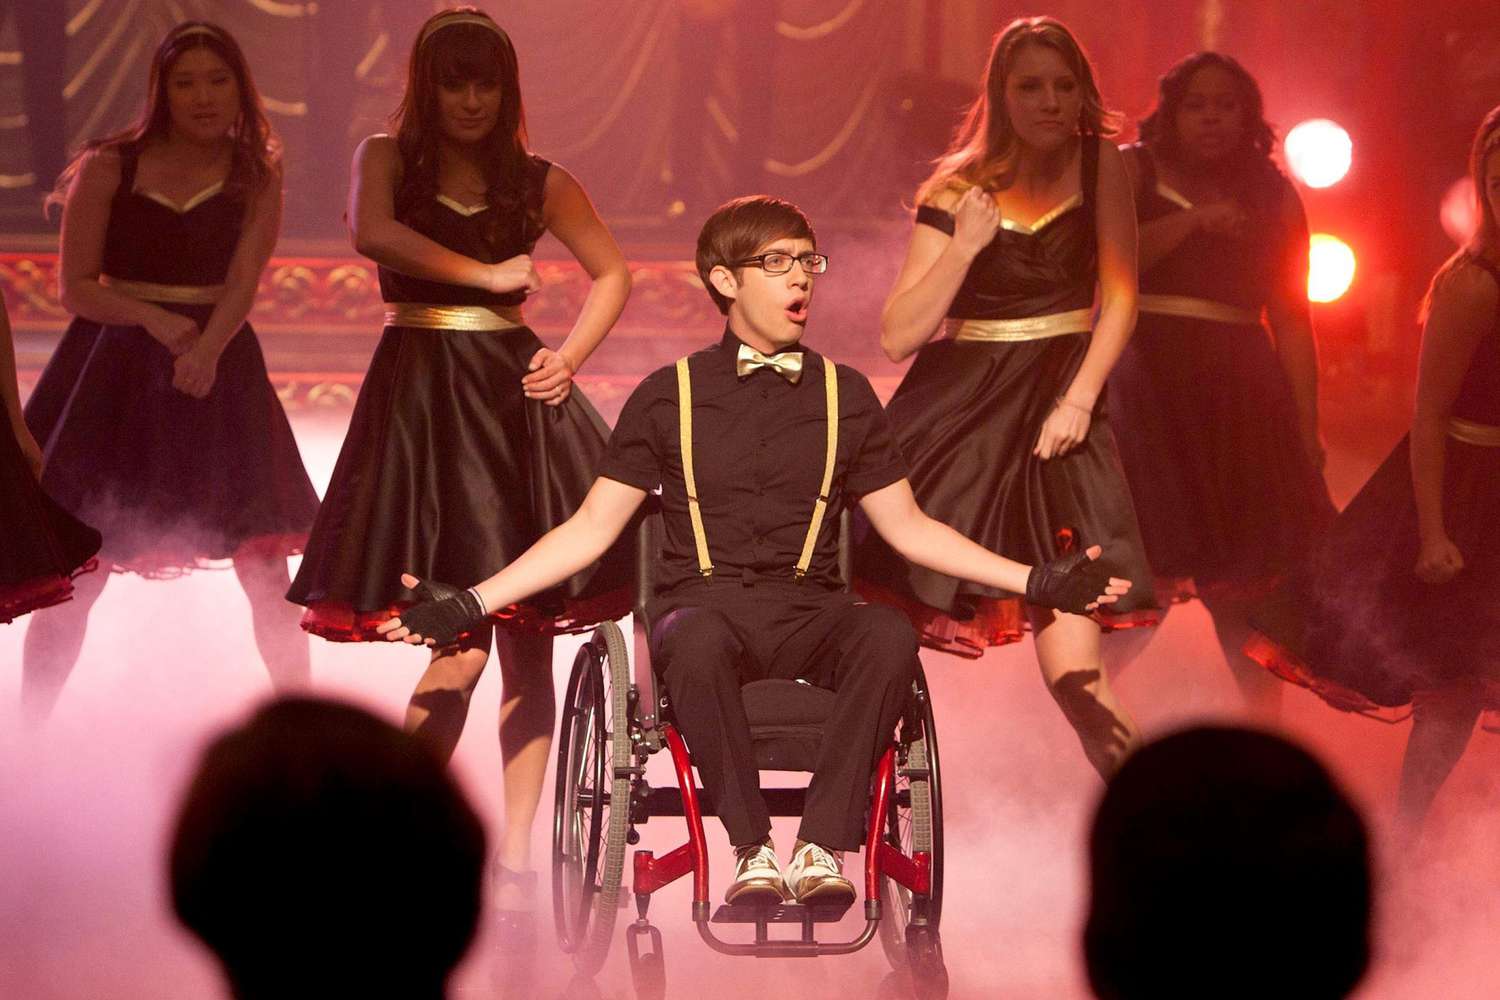 GLEE: New Directions perform at Regionals in the "On My Way" Winter Finale episode of GLEE airing Tuesday, Feb. 21 (8:00-9:00 PM ET/PT) on FOX. (Photo by FOX via Getty Images)